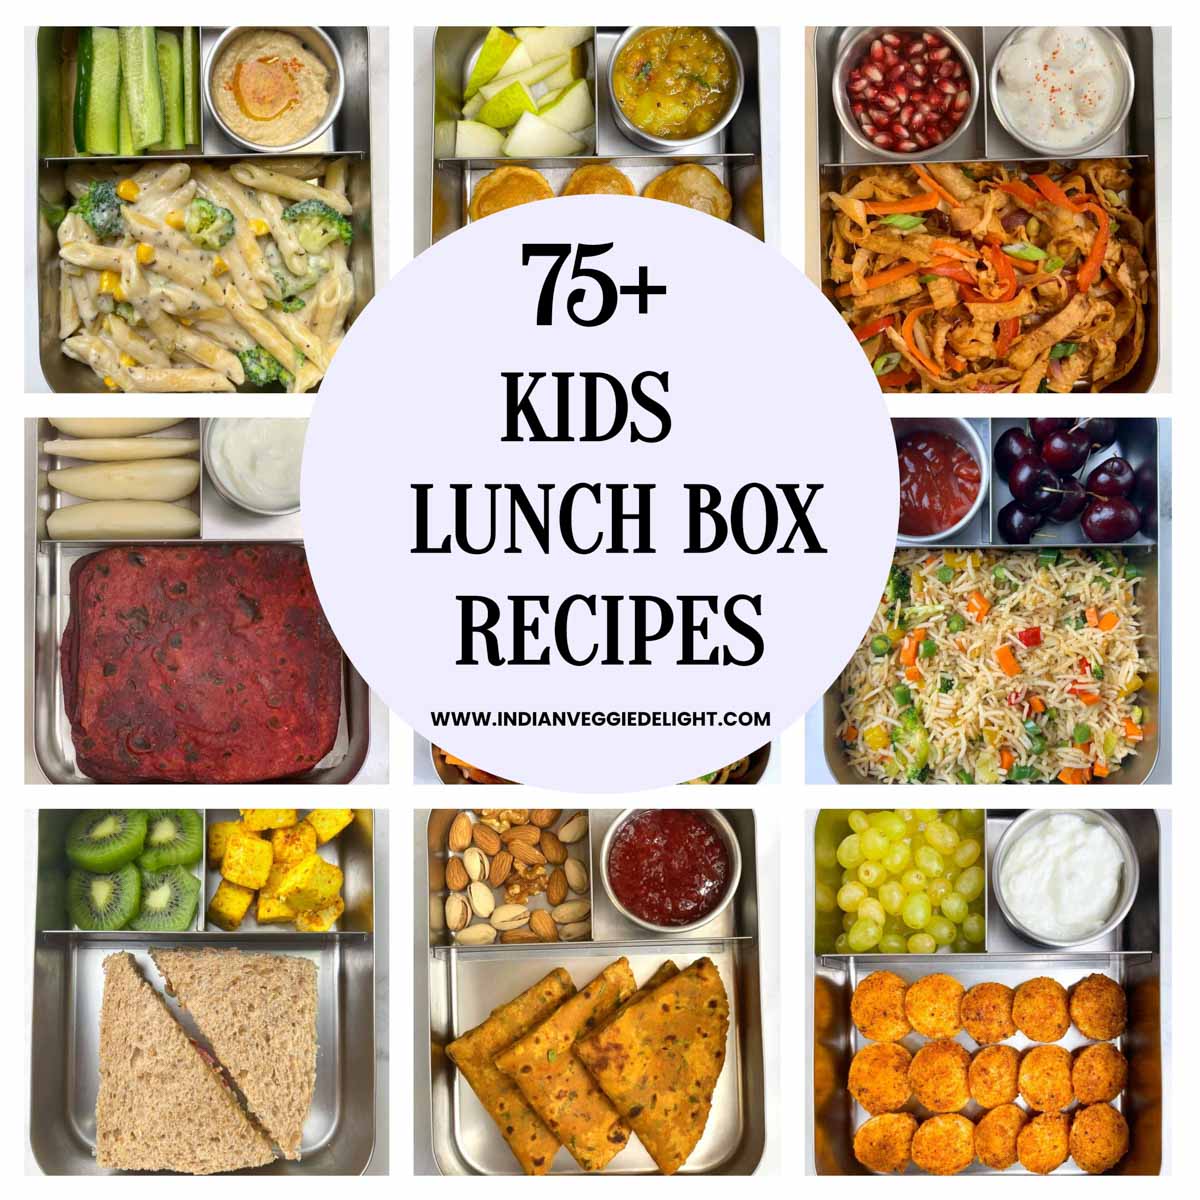 https://www.indianveggiedelight.com/wp-content/uploads/2019/07/75-kid-lunch-box-recipes-featured.jpg